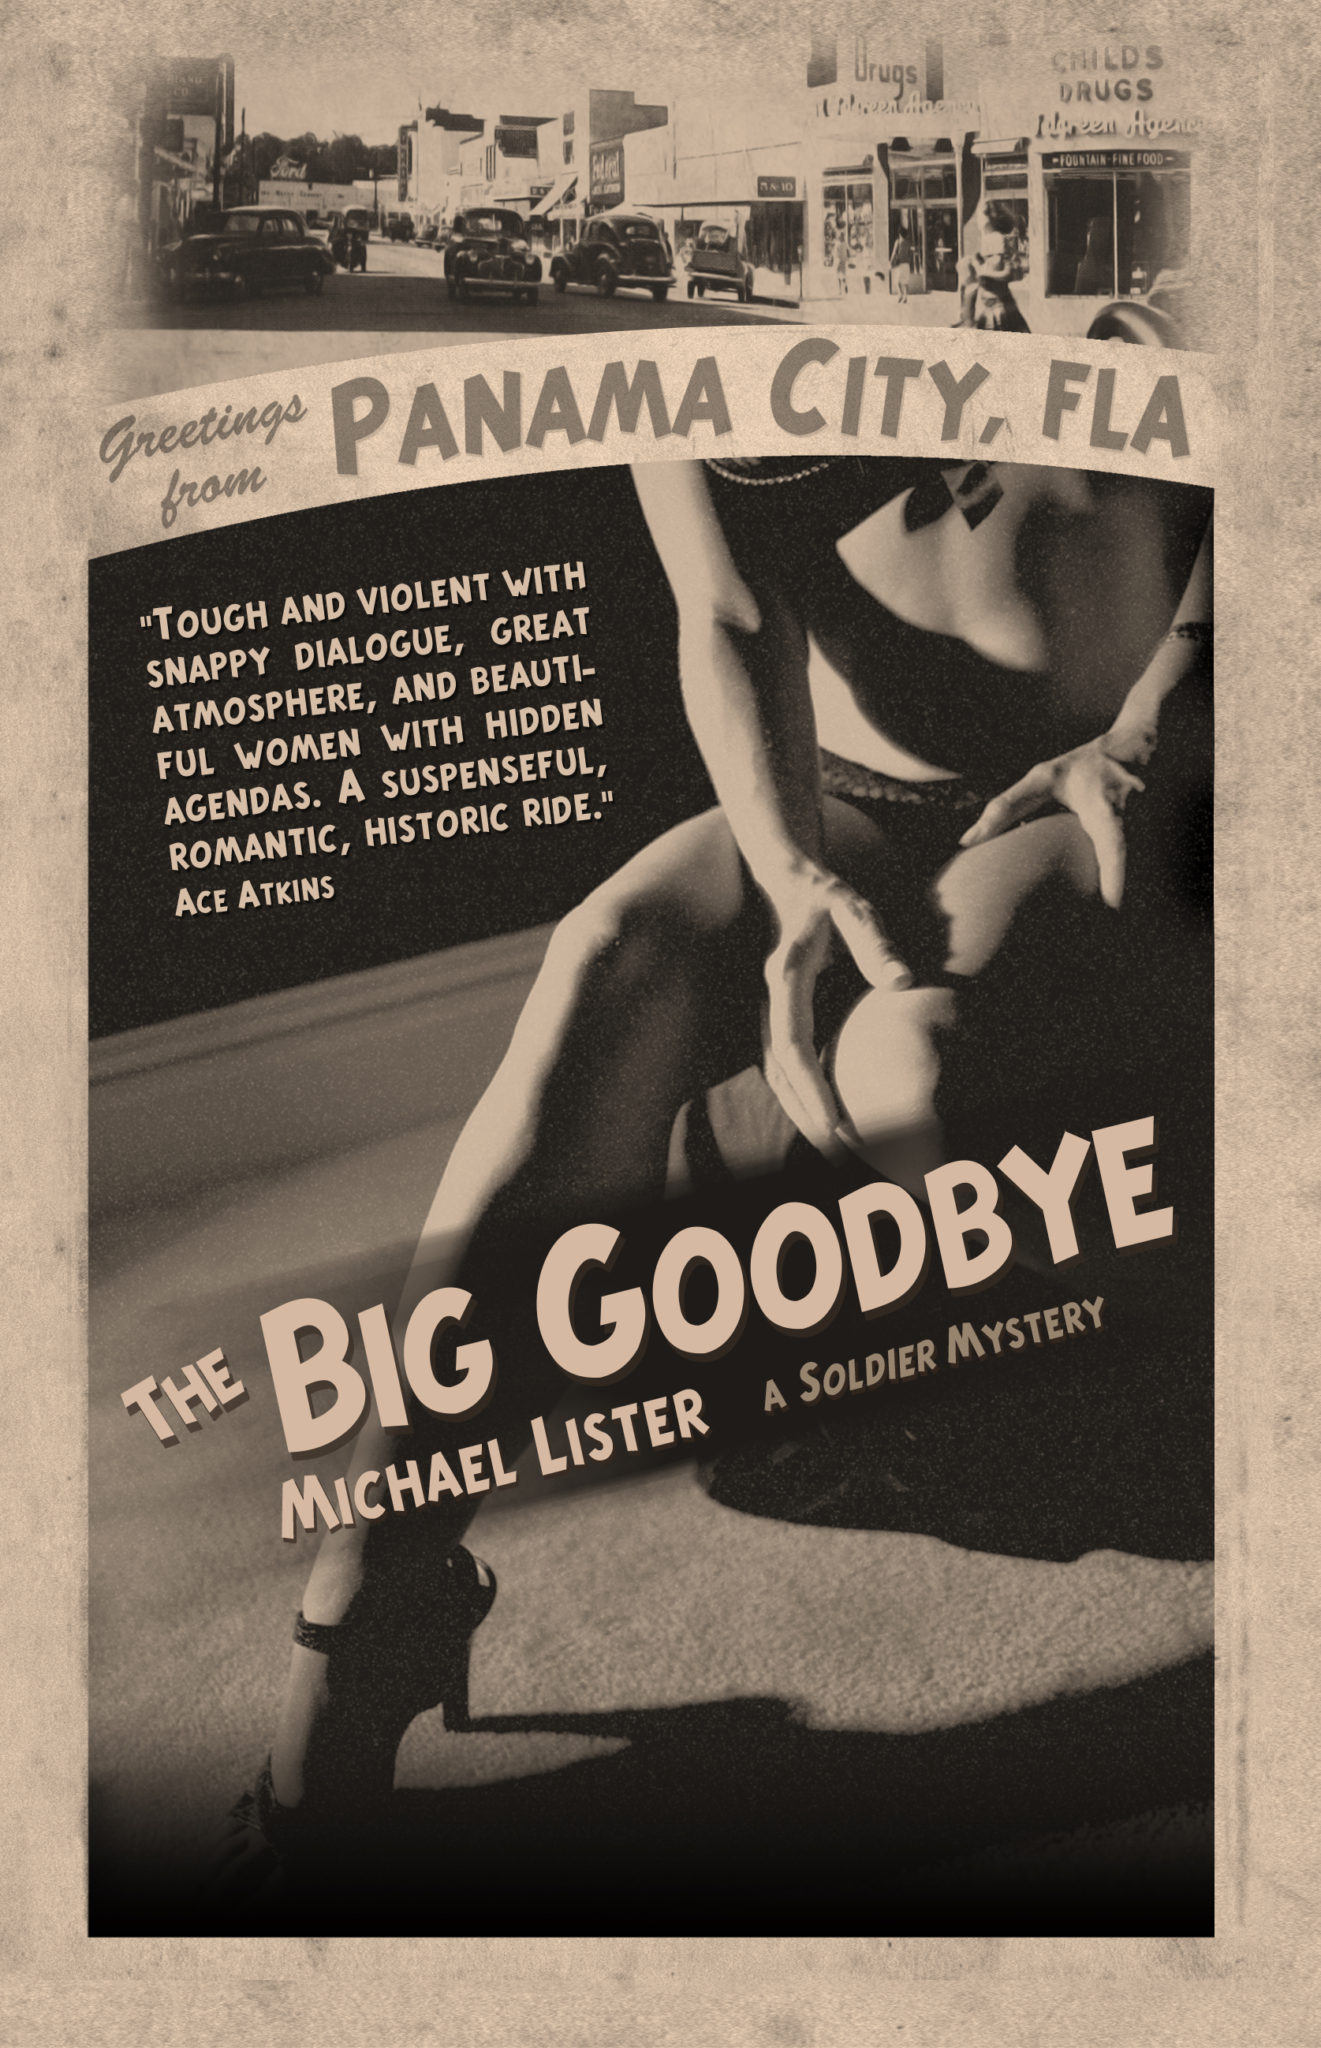 FREE: The Big Goodbye by Michael Lister